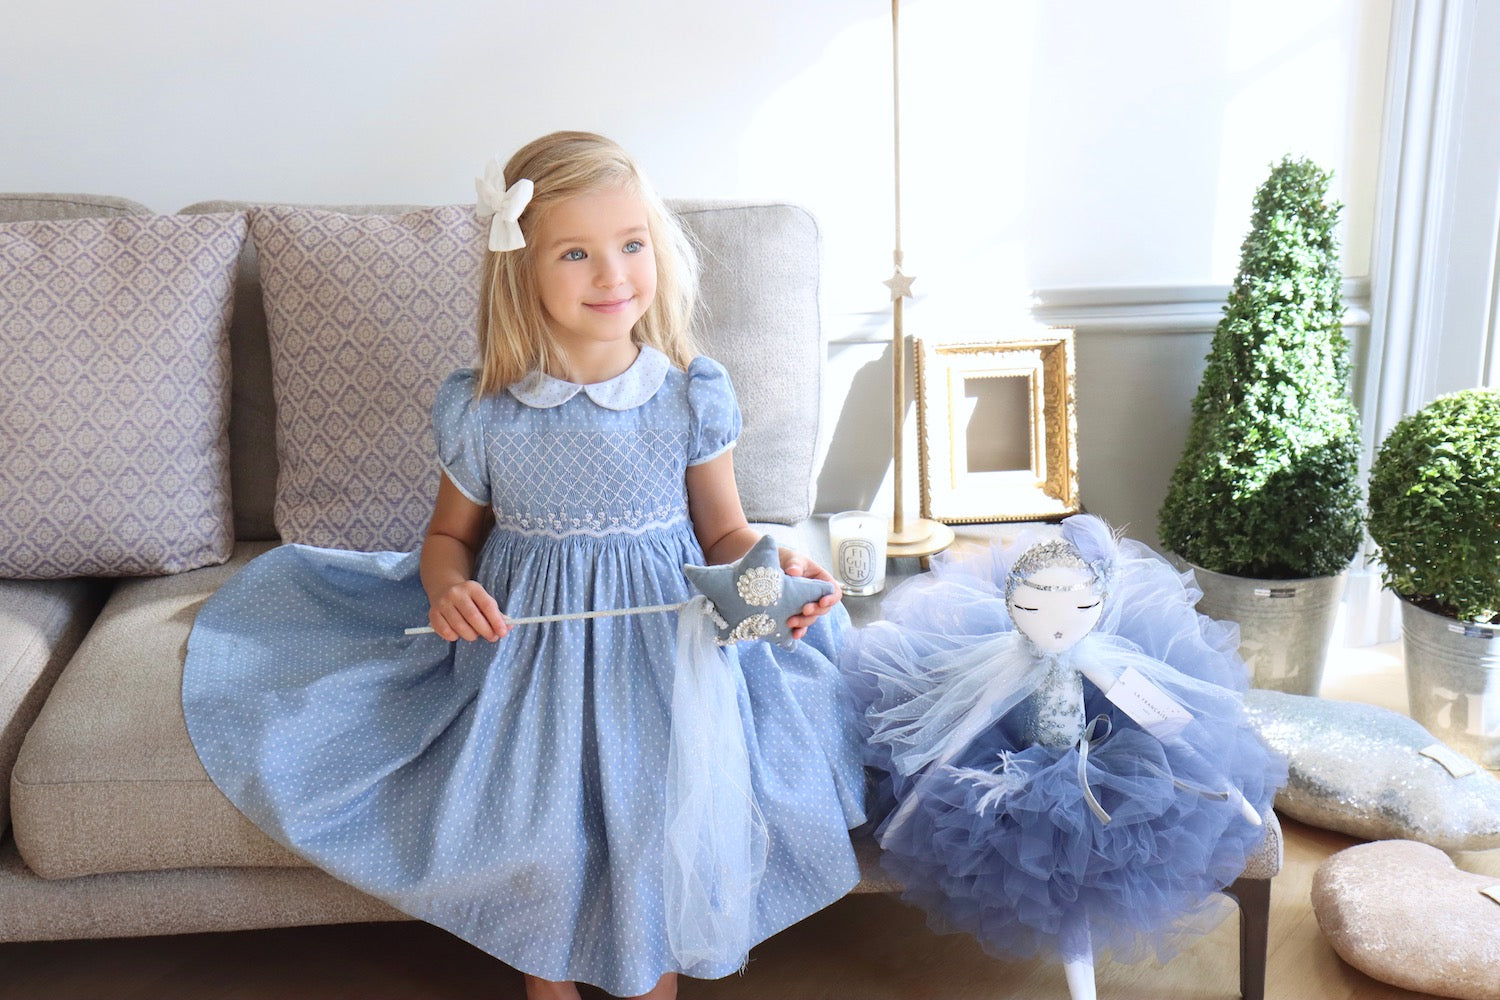 WHAT MAKES OUR SMOCKED AND EMBROIDERED DRESSES SO SPECIAL